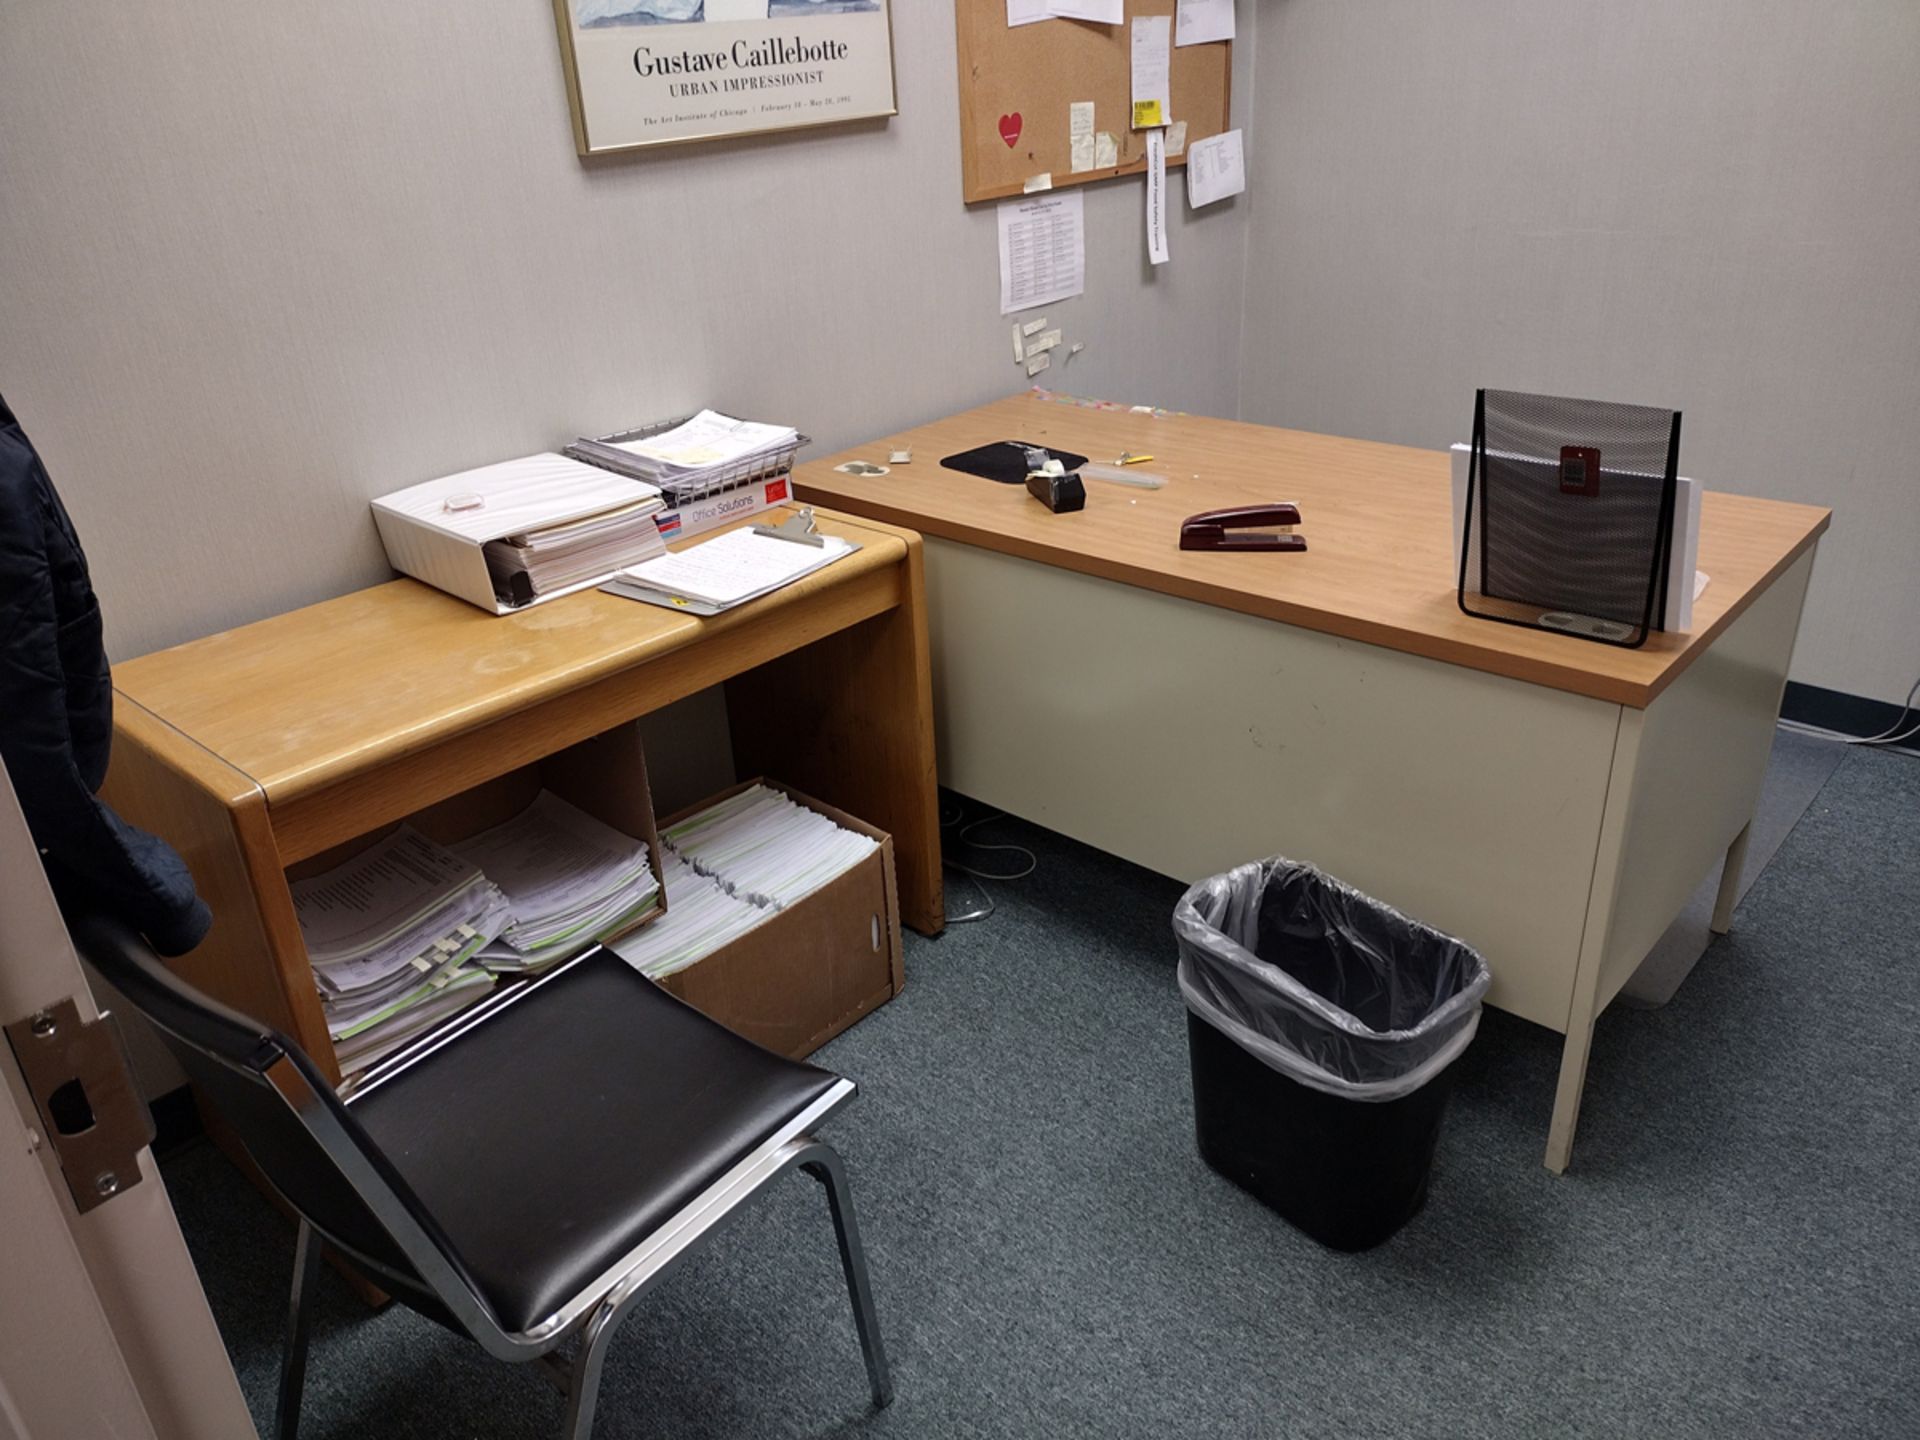 Group of Office Furniture Throughout Rooms - Image 16 of 17